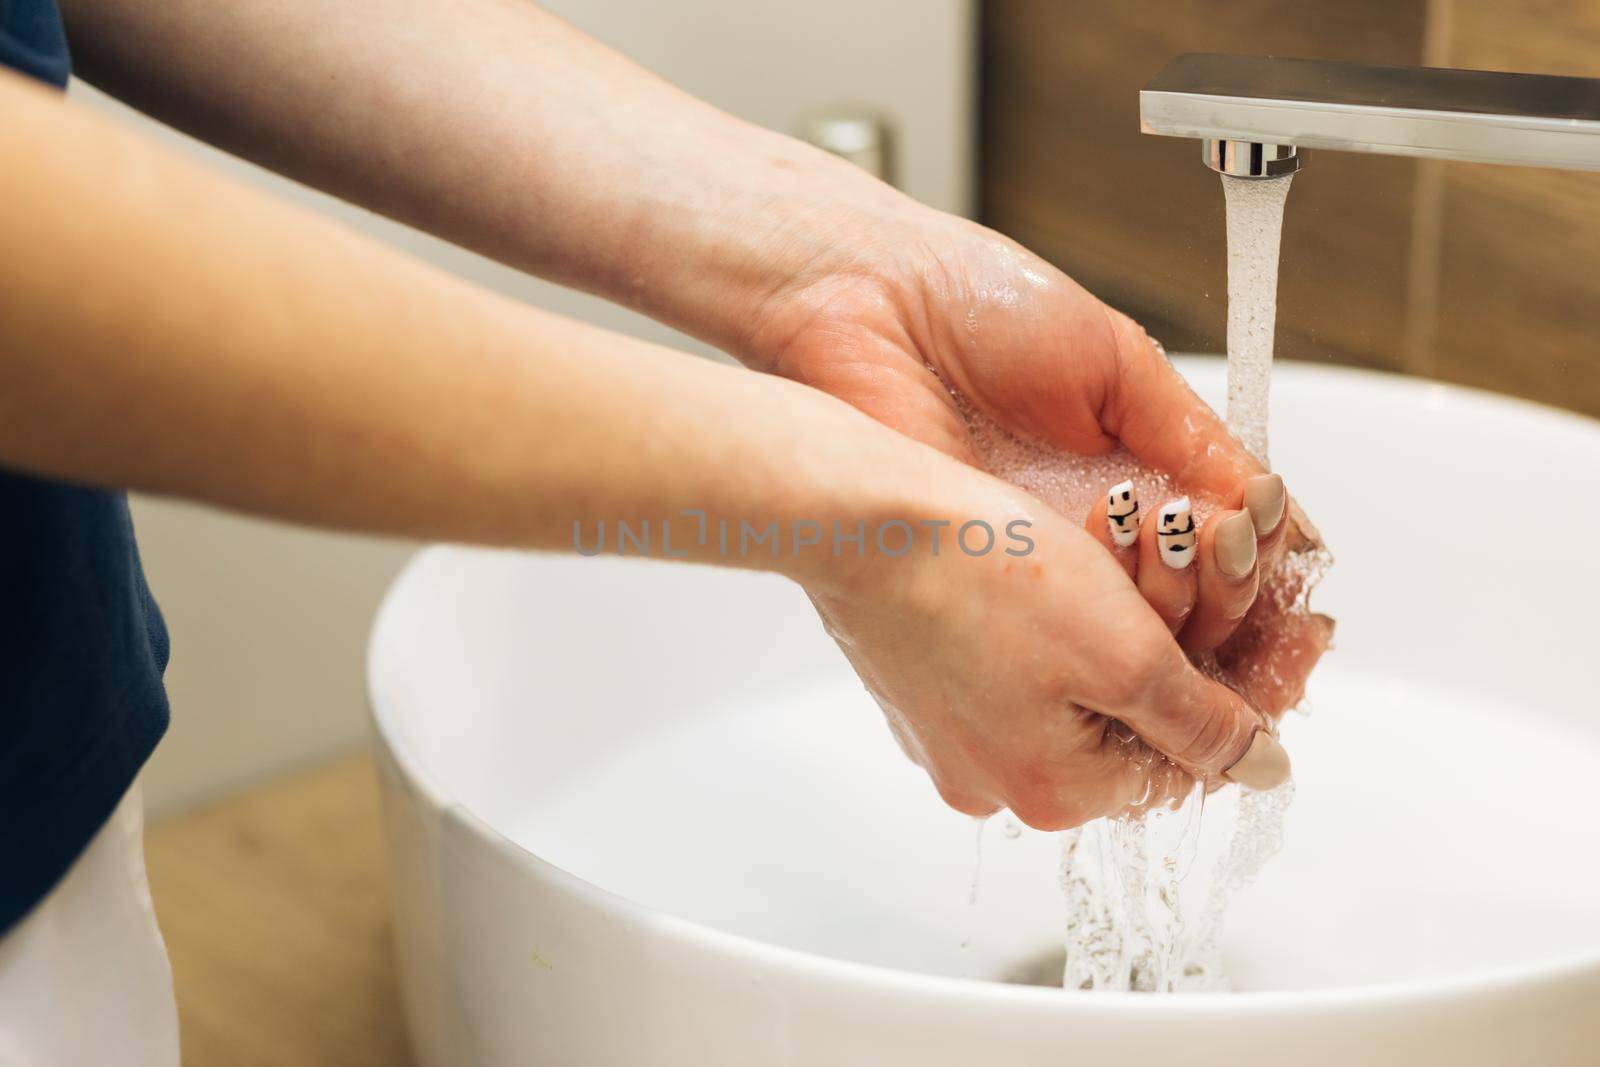 Hands of woman wash their hands in a sink to wash the skin and water flows through the hands. Concept of health, cleaning and preventing germs and coronavirus from contacting hands